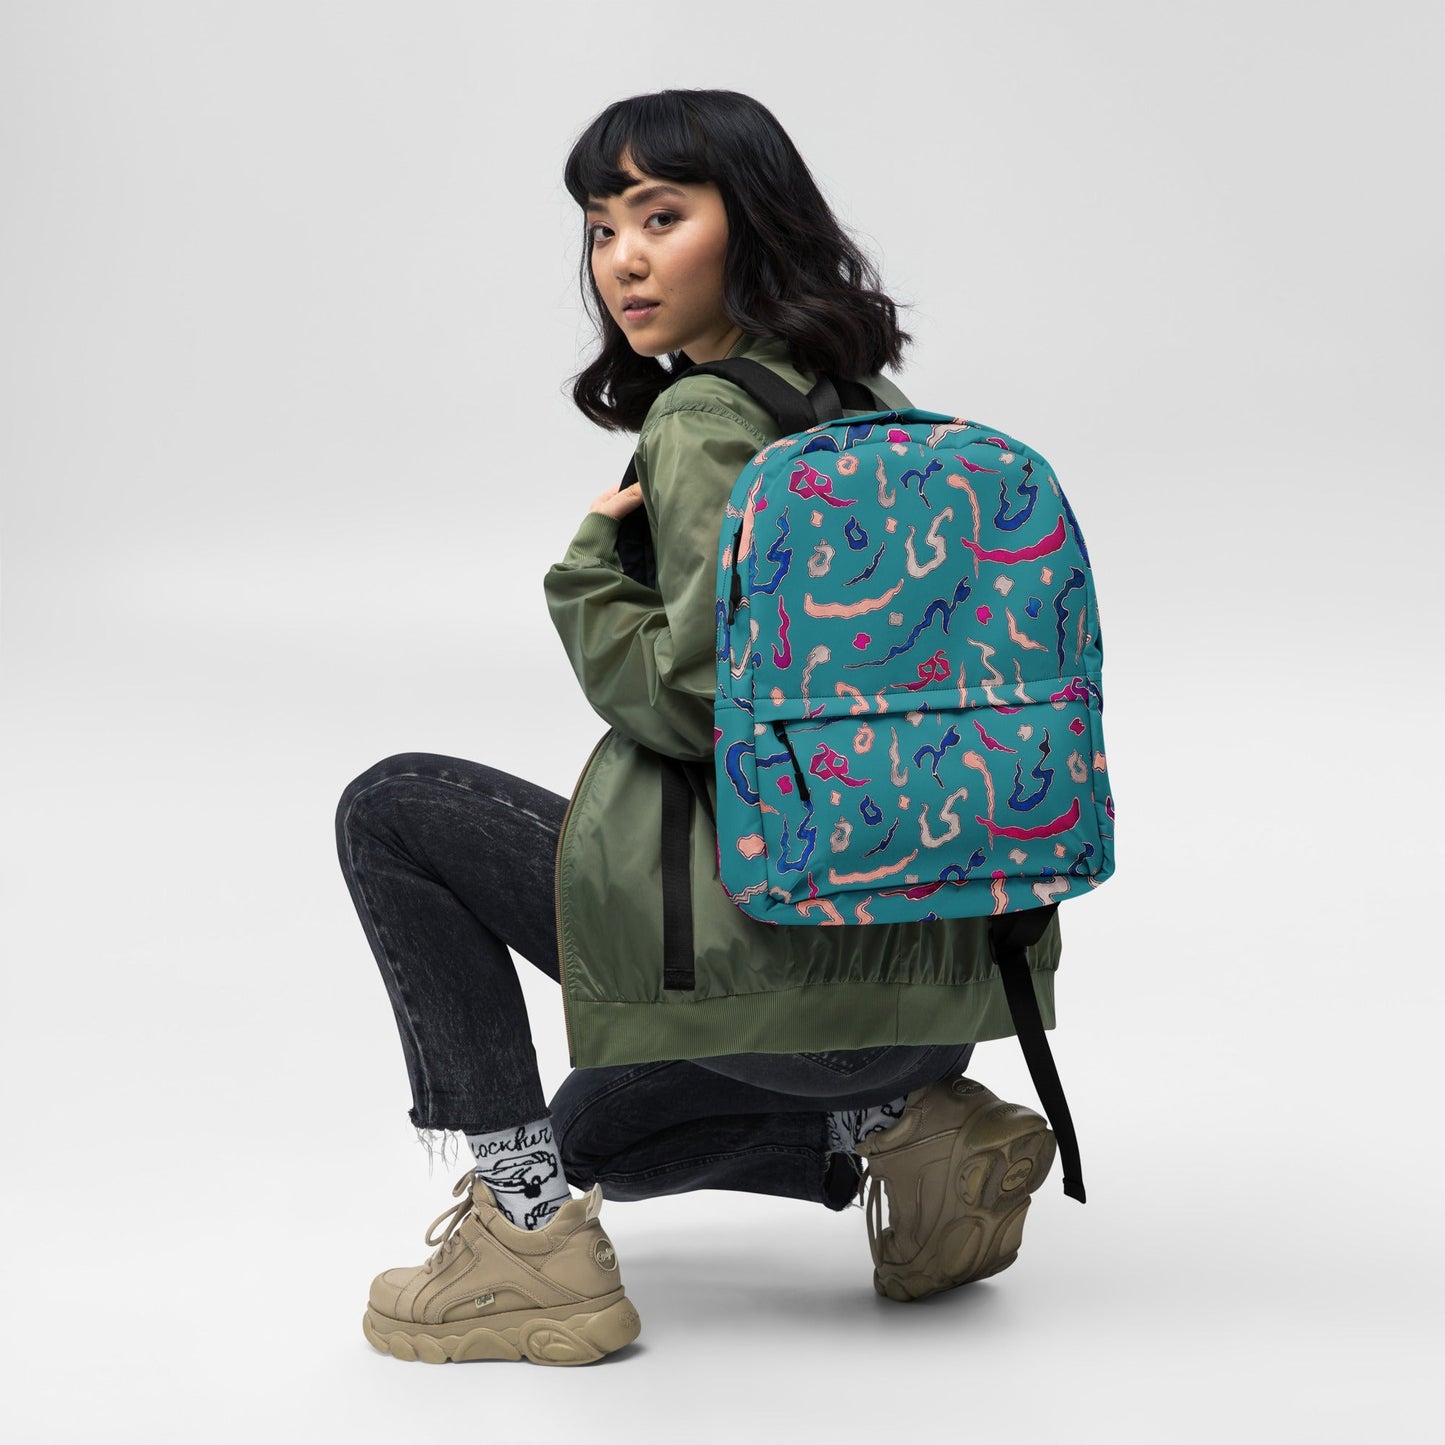 Kindness | All-Over Printed Backpack - Bonotee